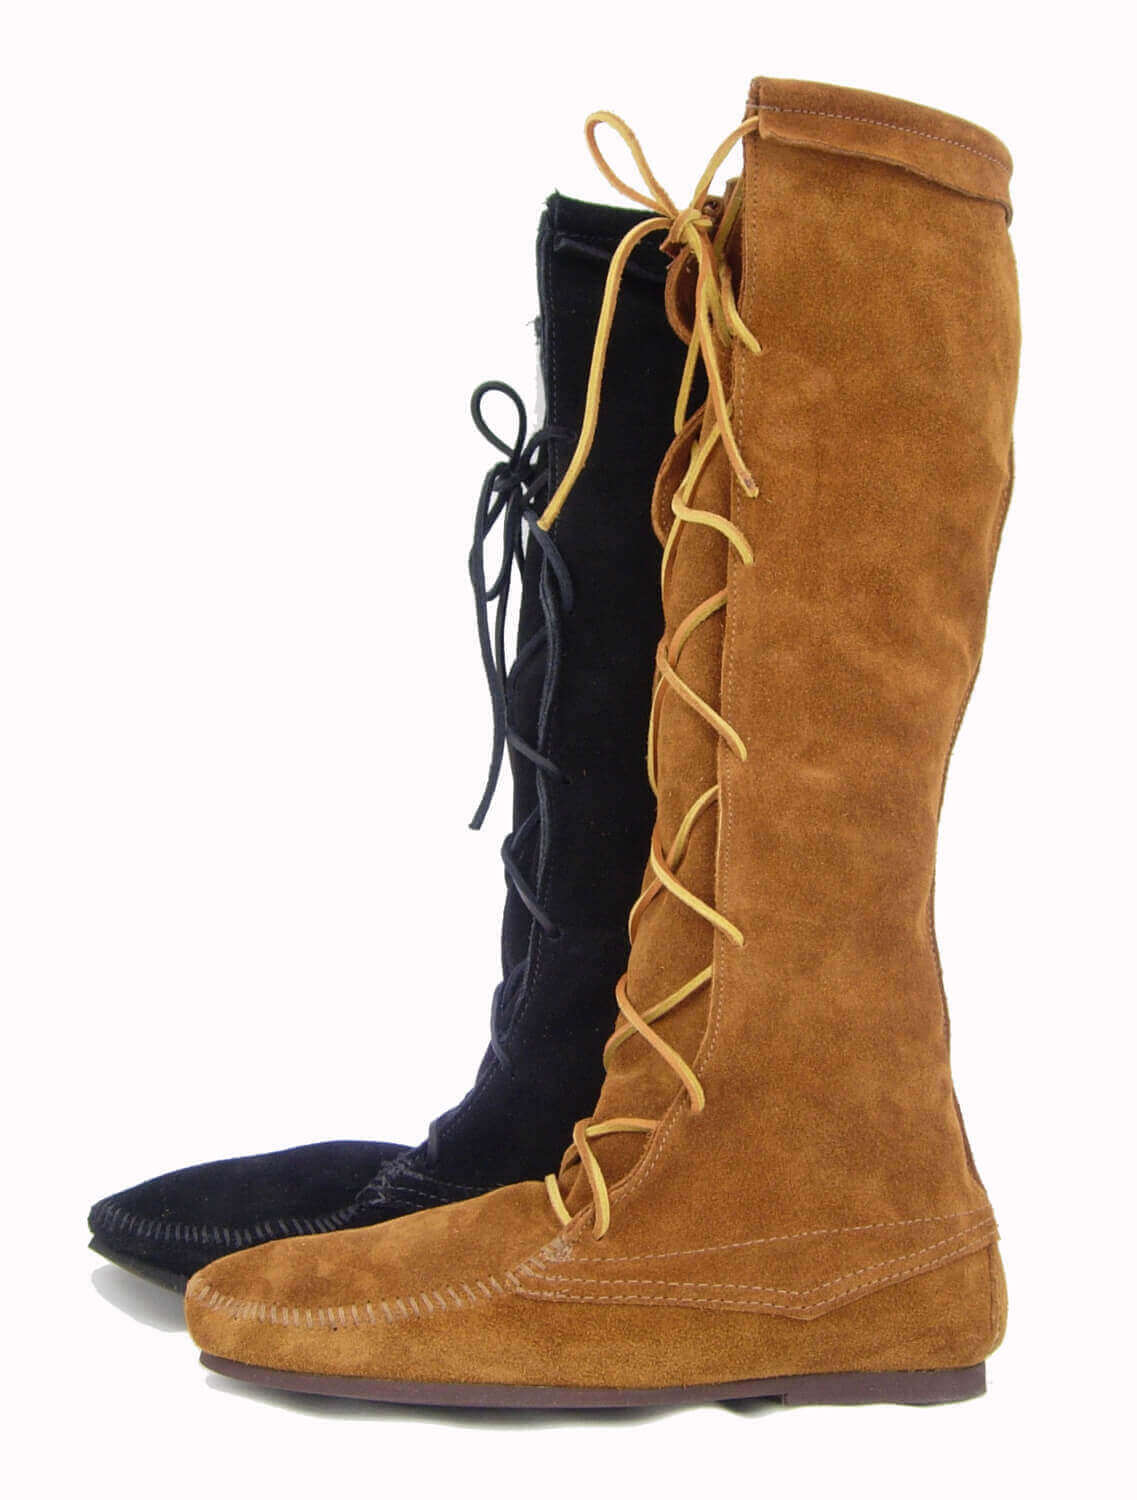 Suede Knee-High Boots For Highland 